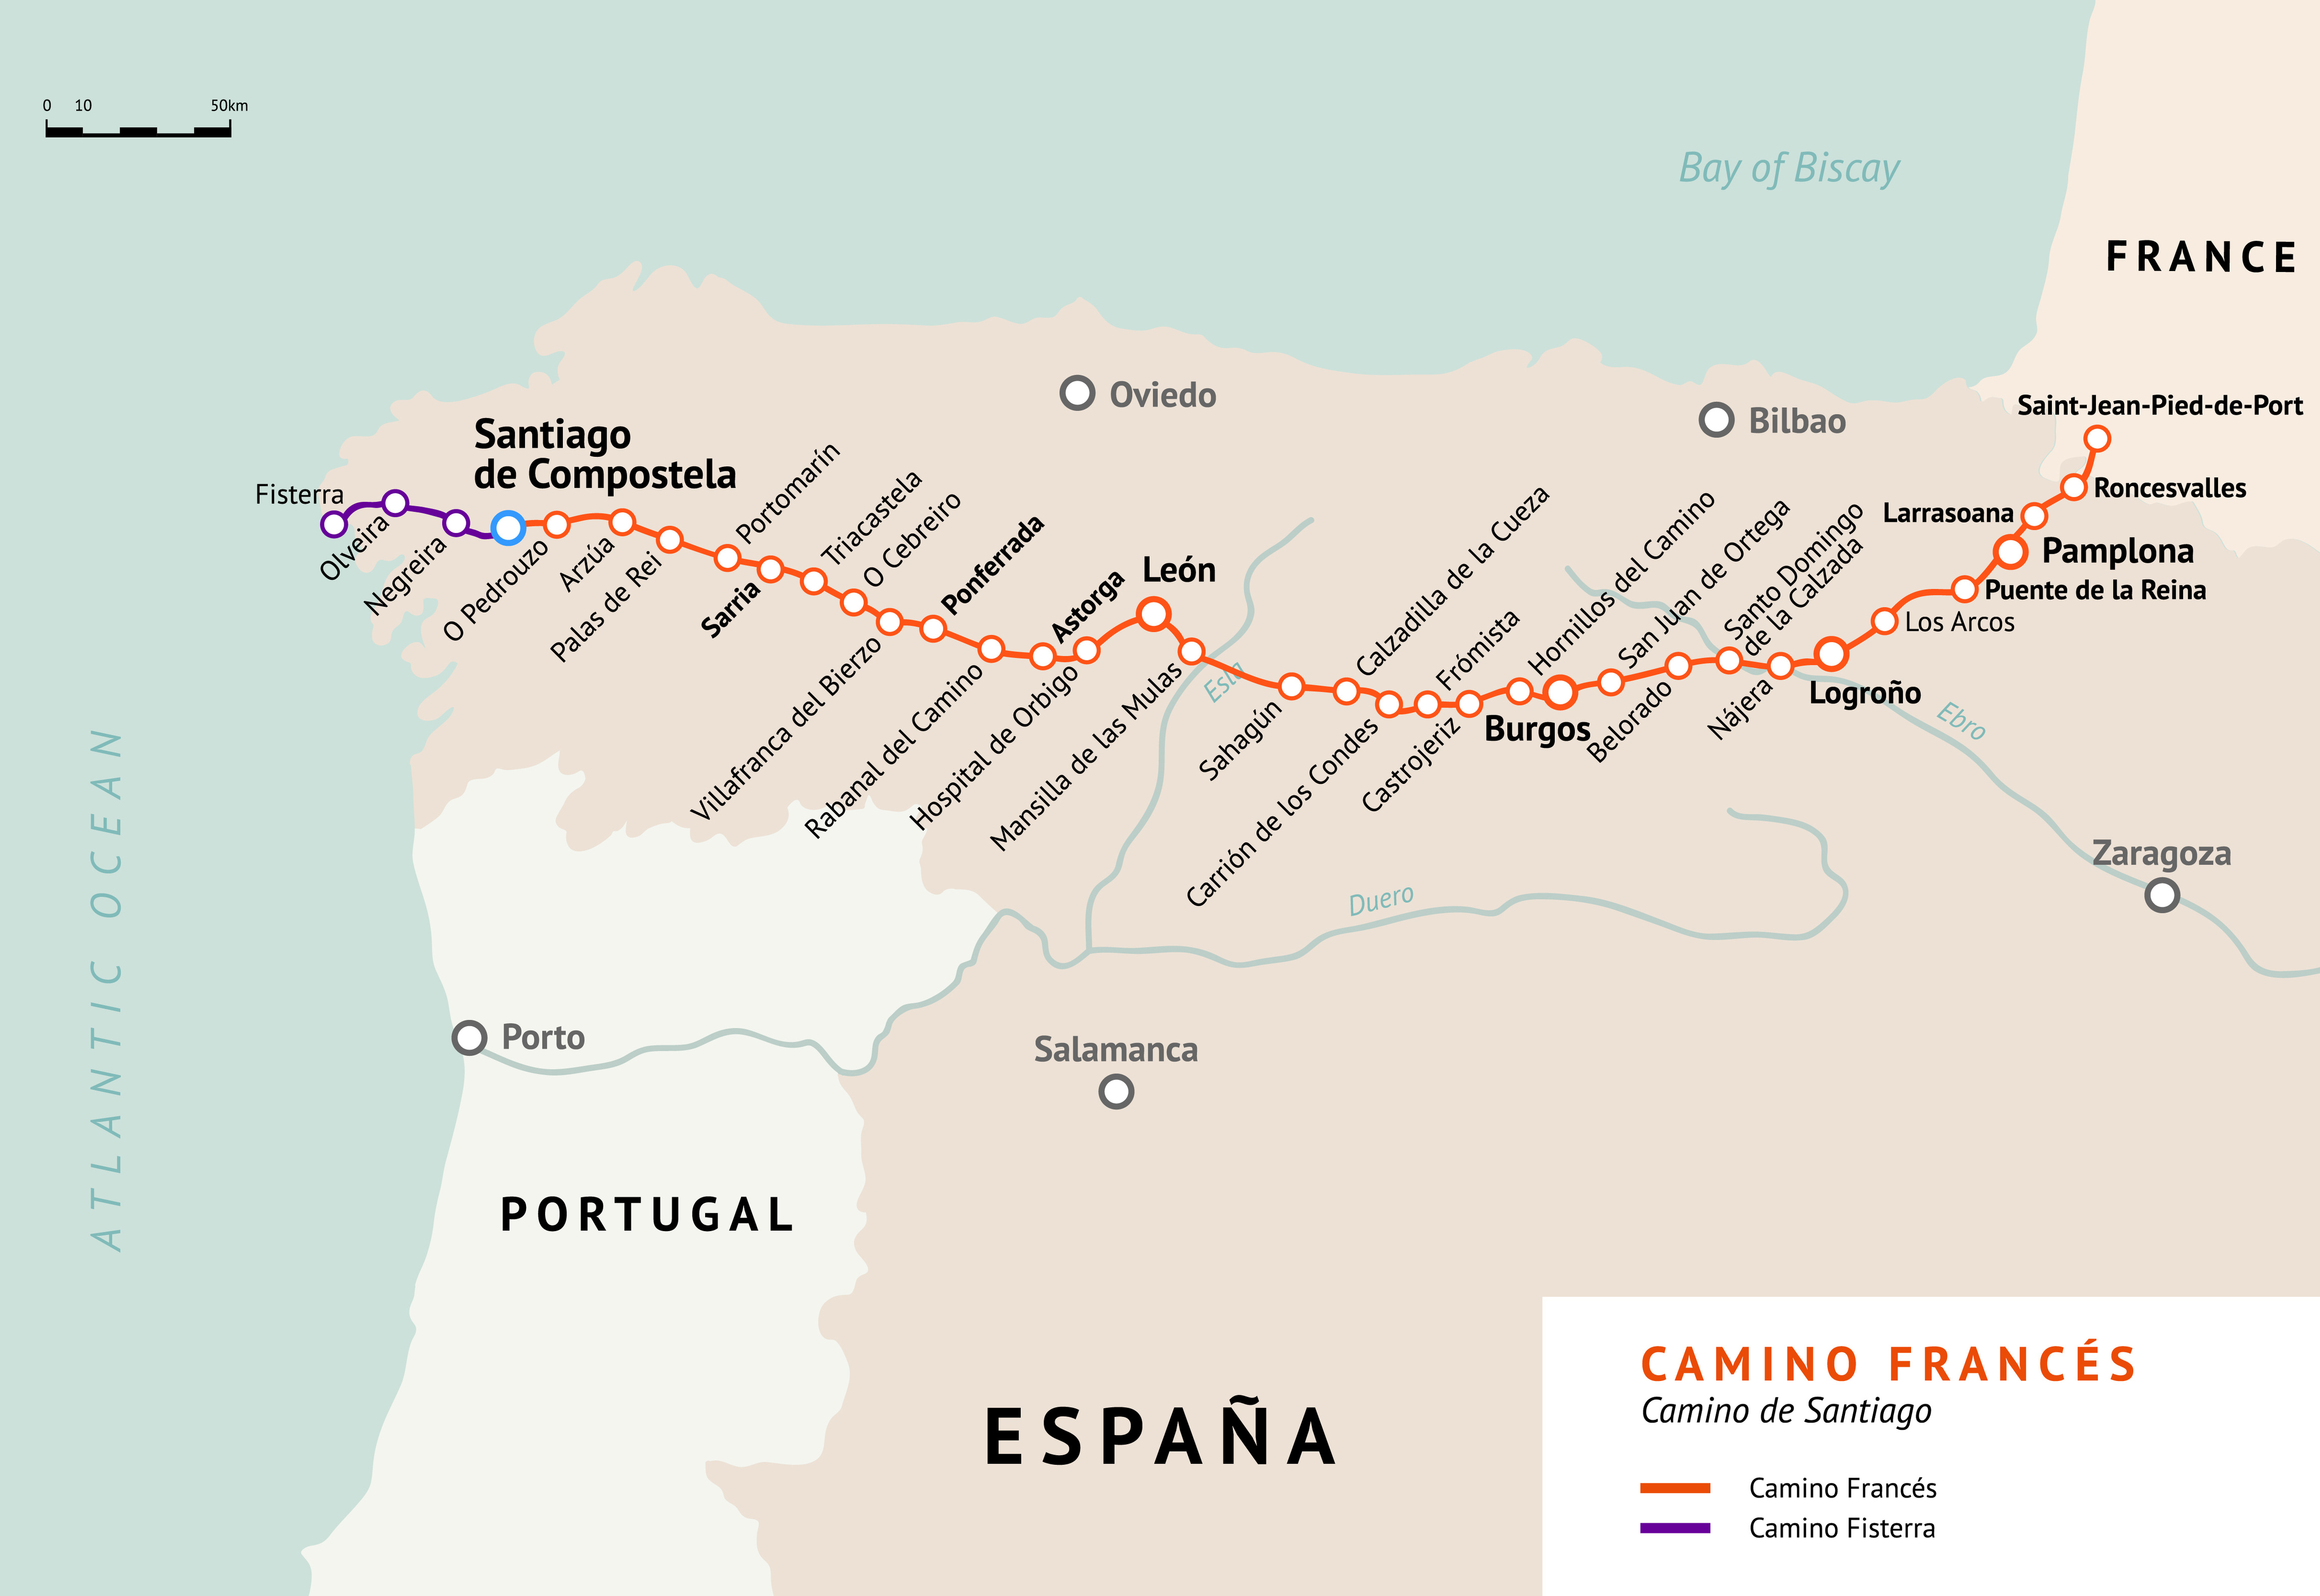 The Camino de Santiago’s French Way: A Step-by-Step Guide to One of the World’s Most Famous Pilgrimage Routes